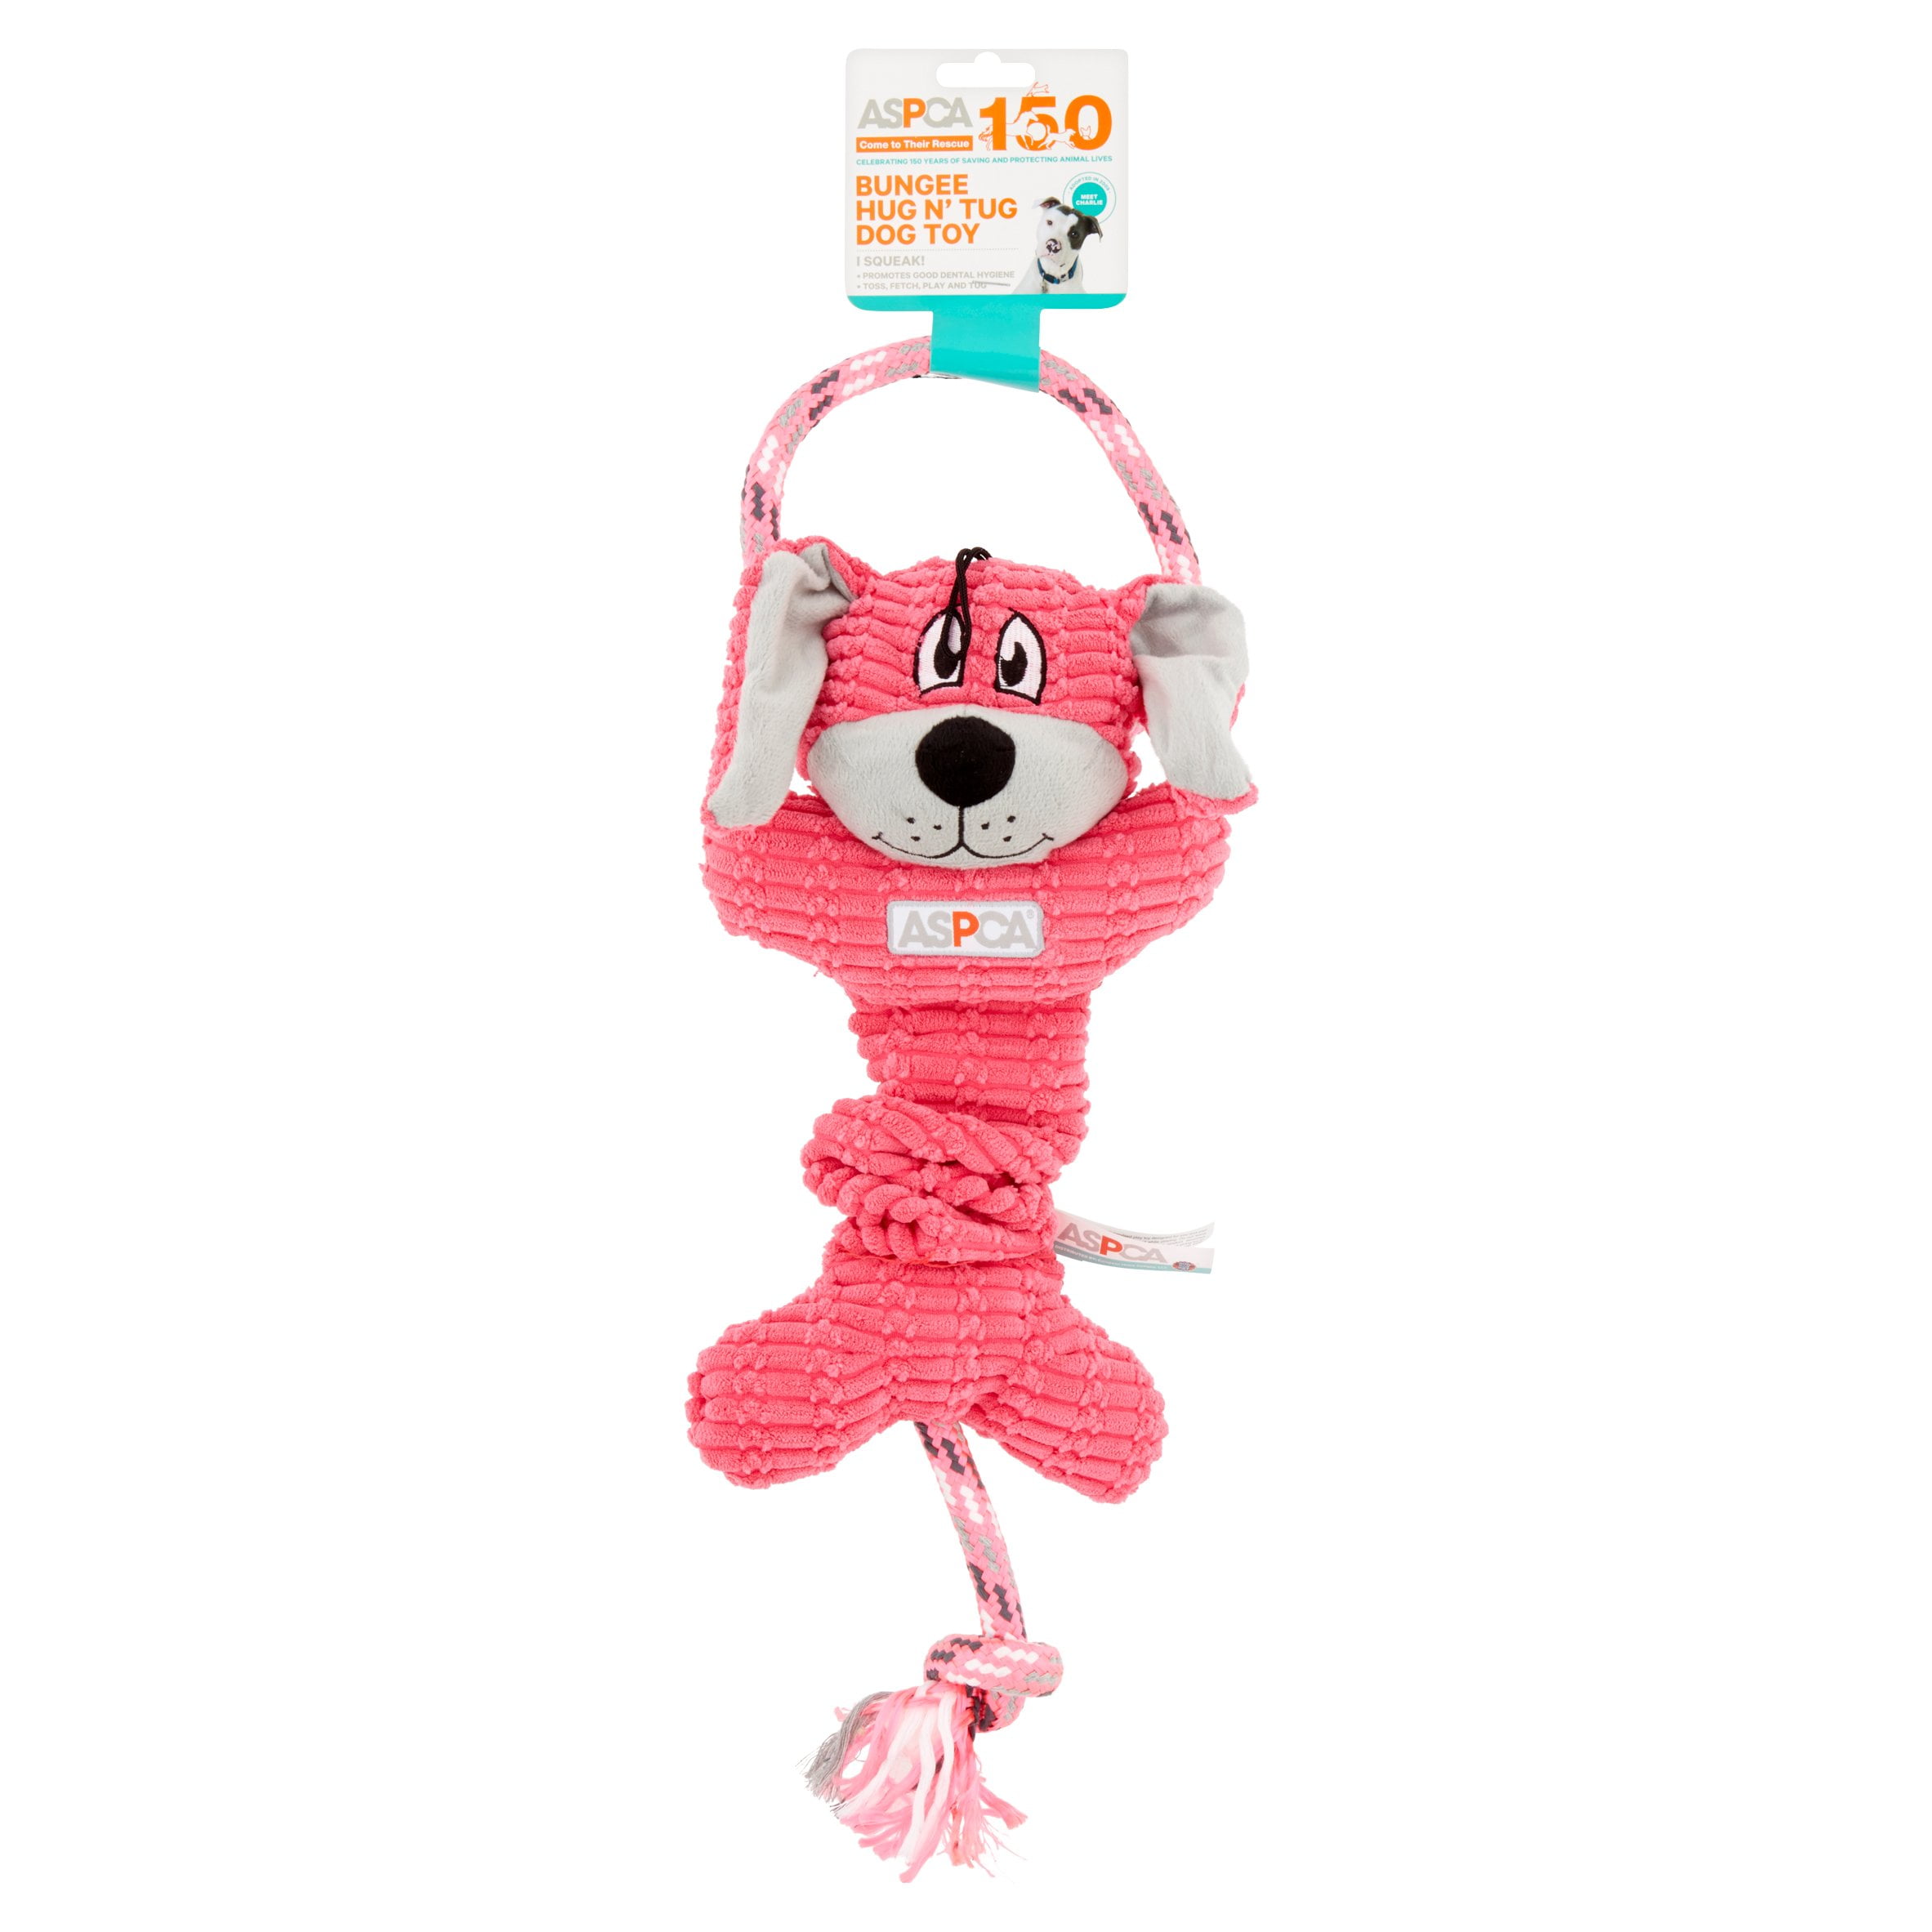 Spam Can Squeaky Rope Pet Toy